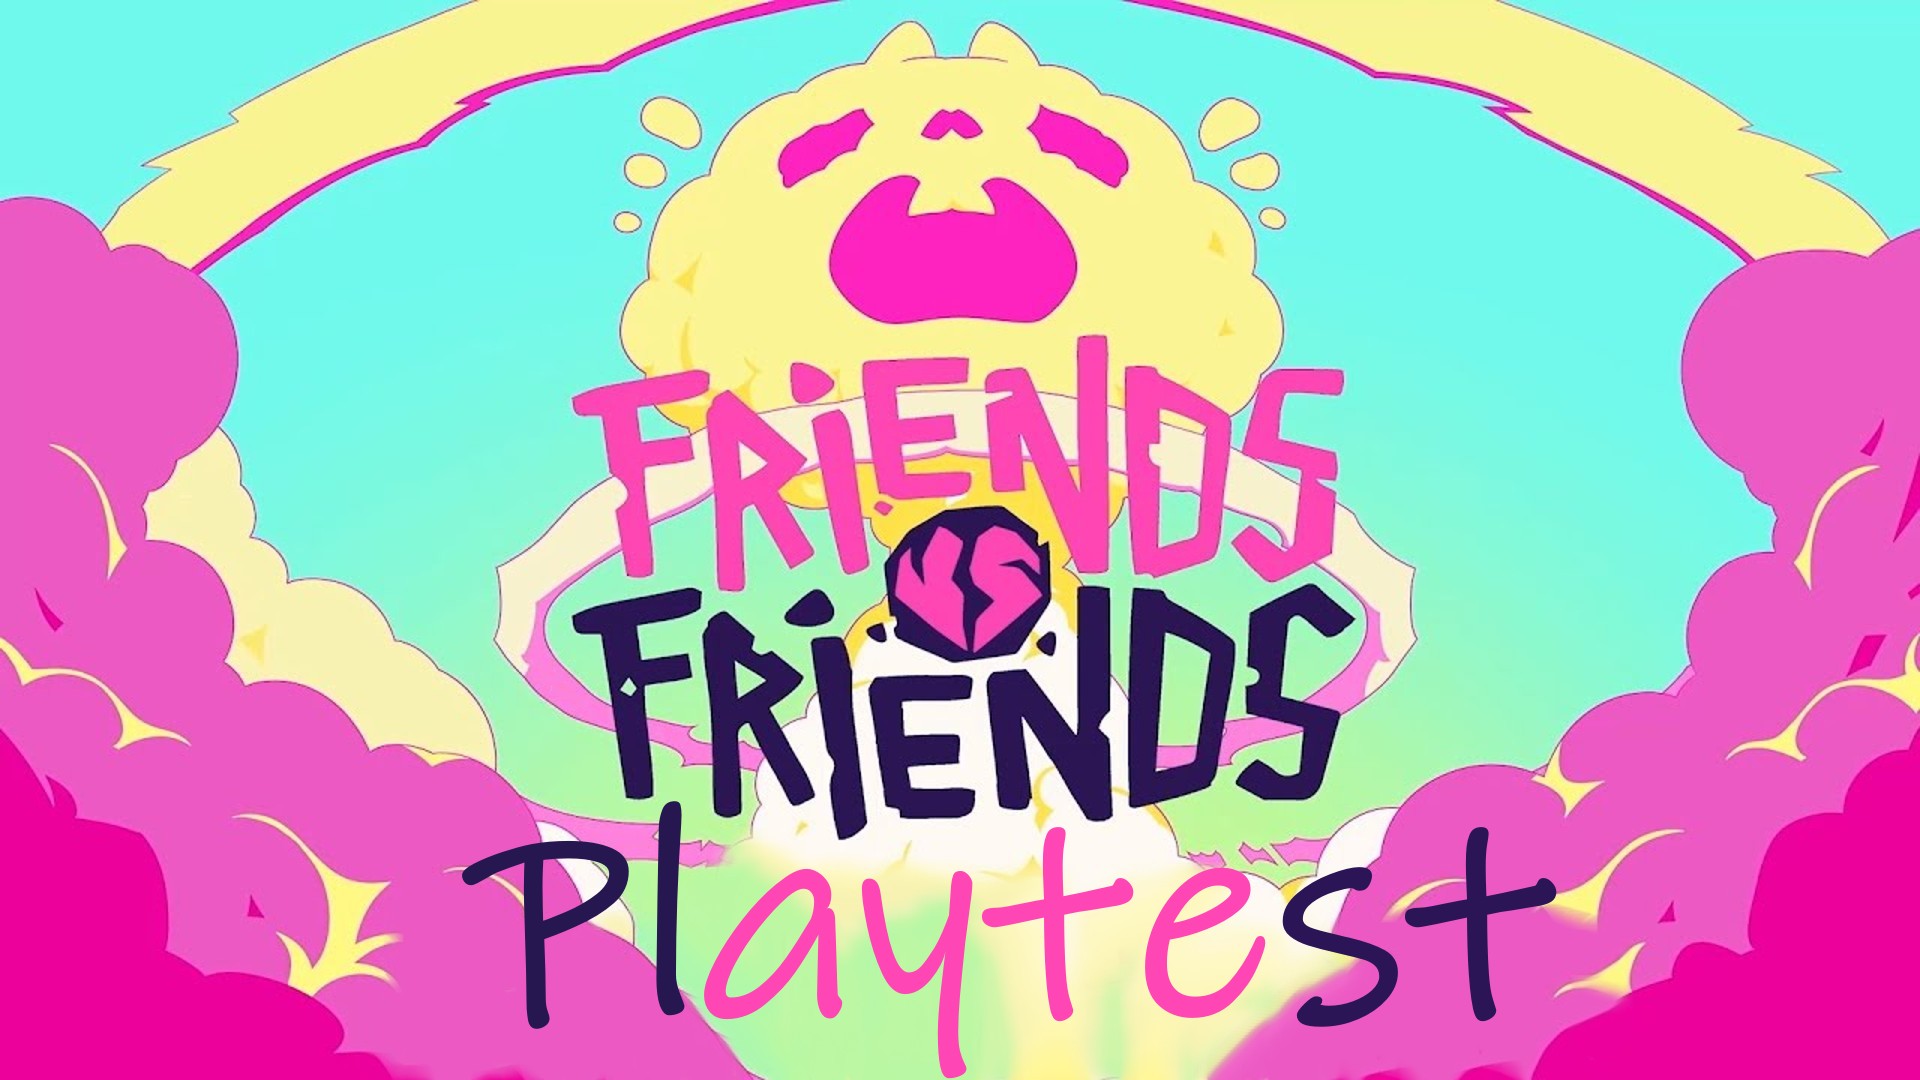 Friends vs Friends Playtest no commentary